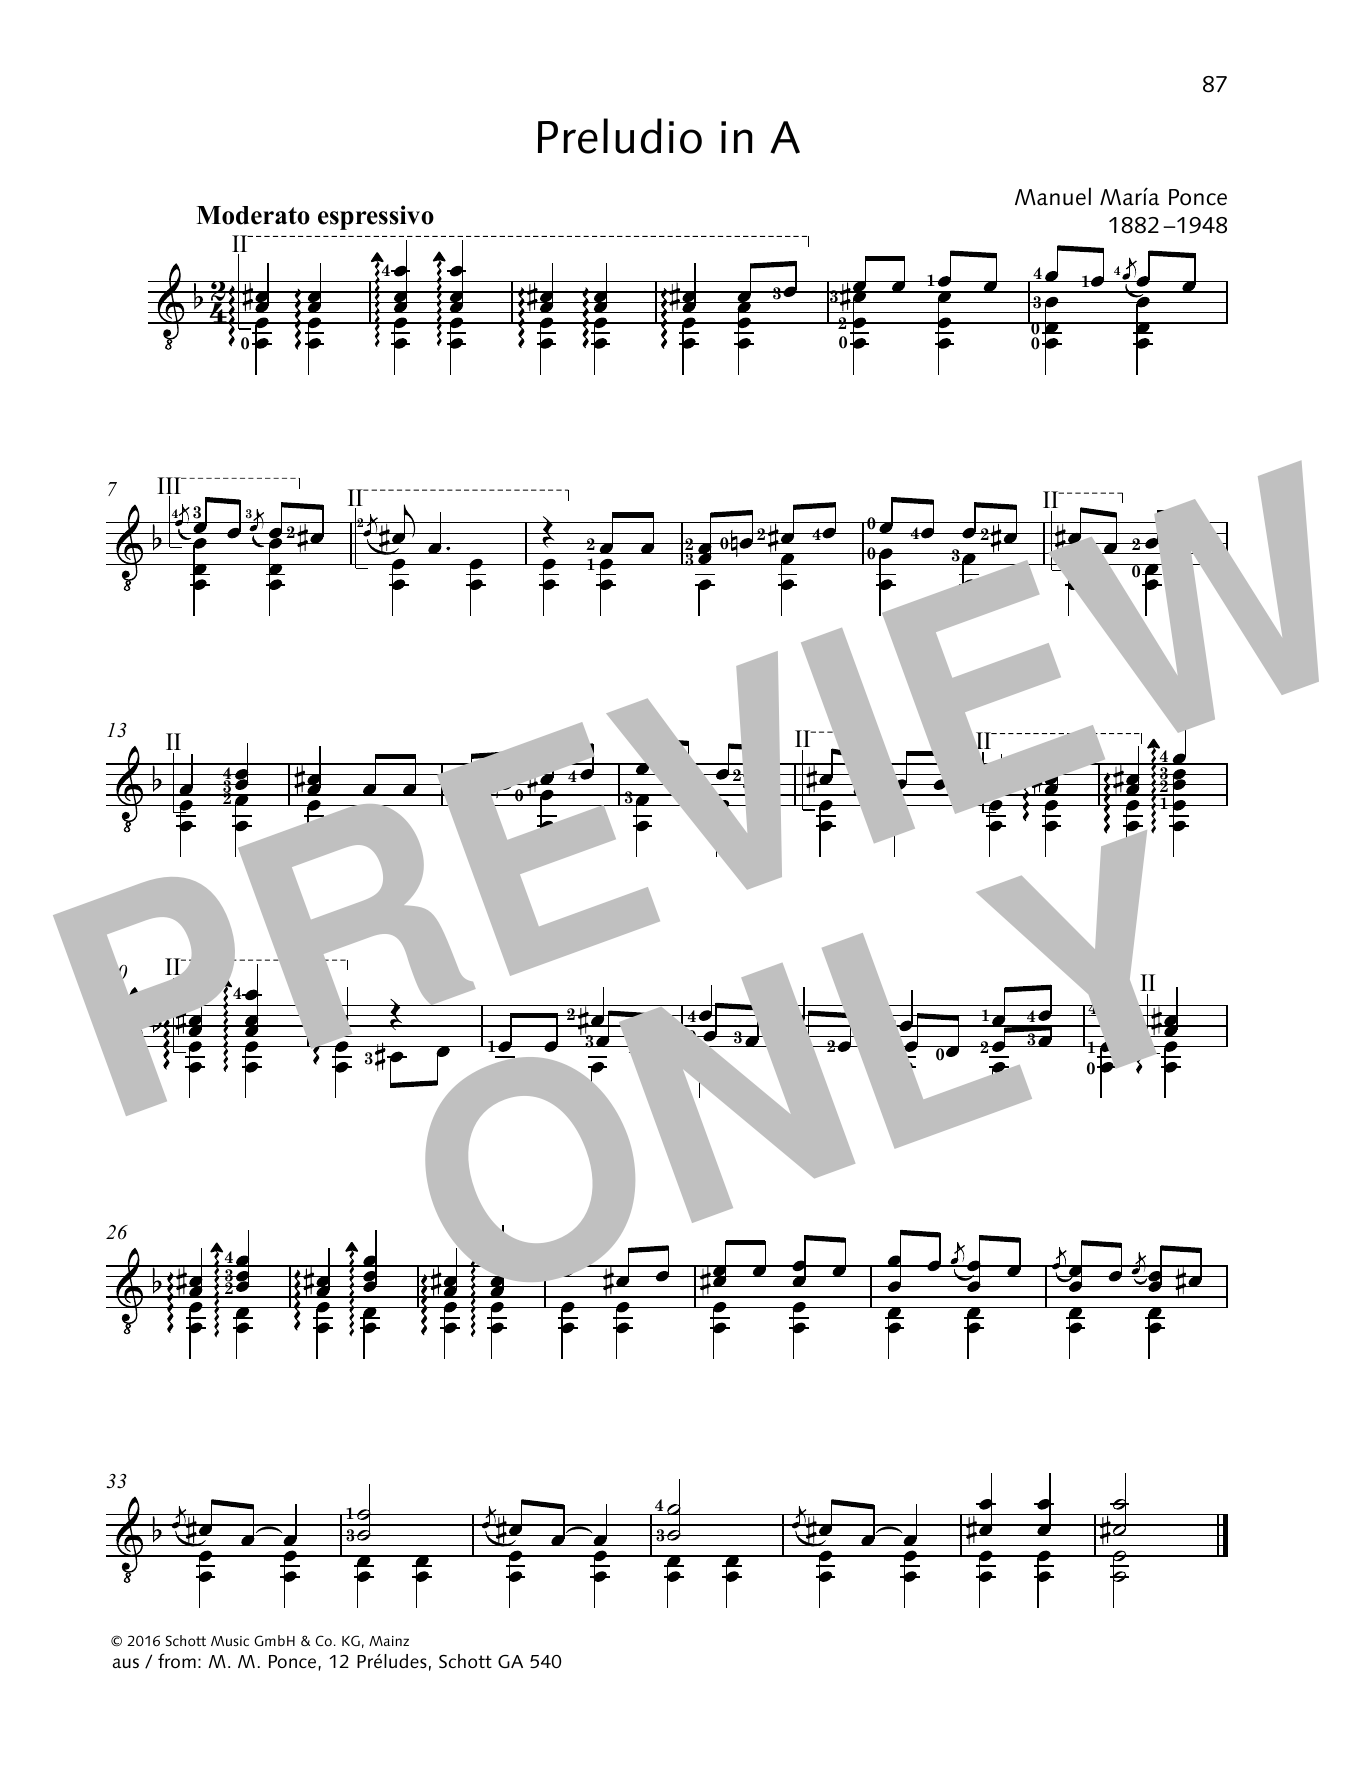 Download Manuel Maria Ponce Preludio in A Sheet Music